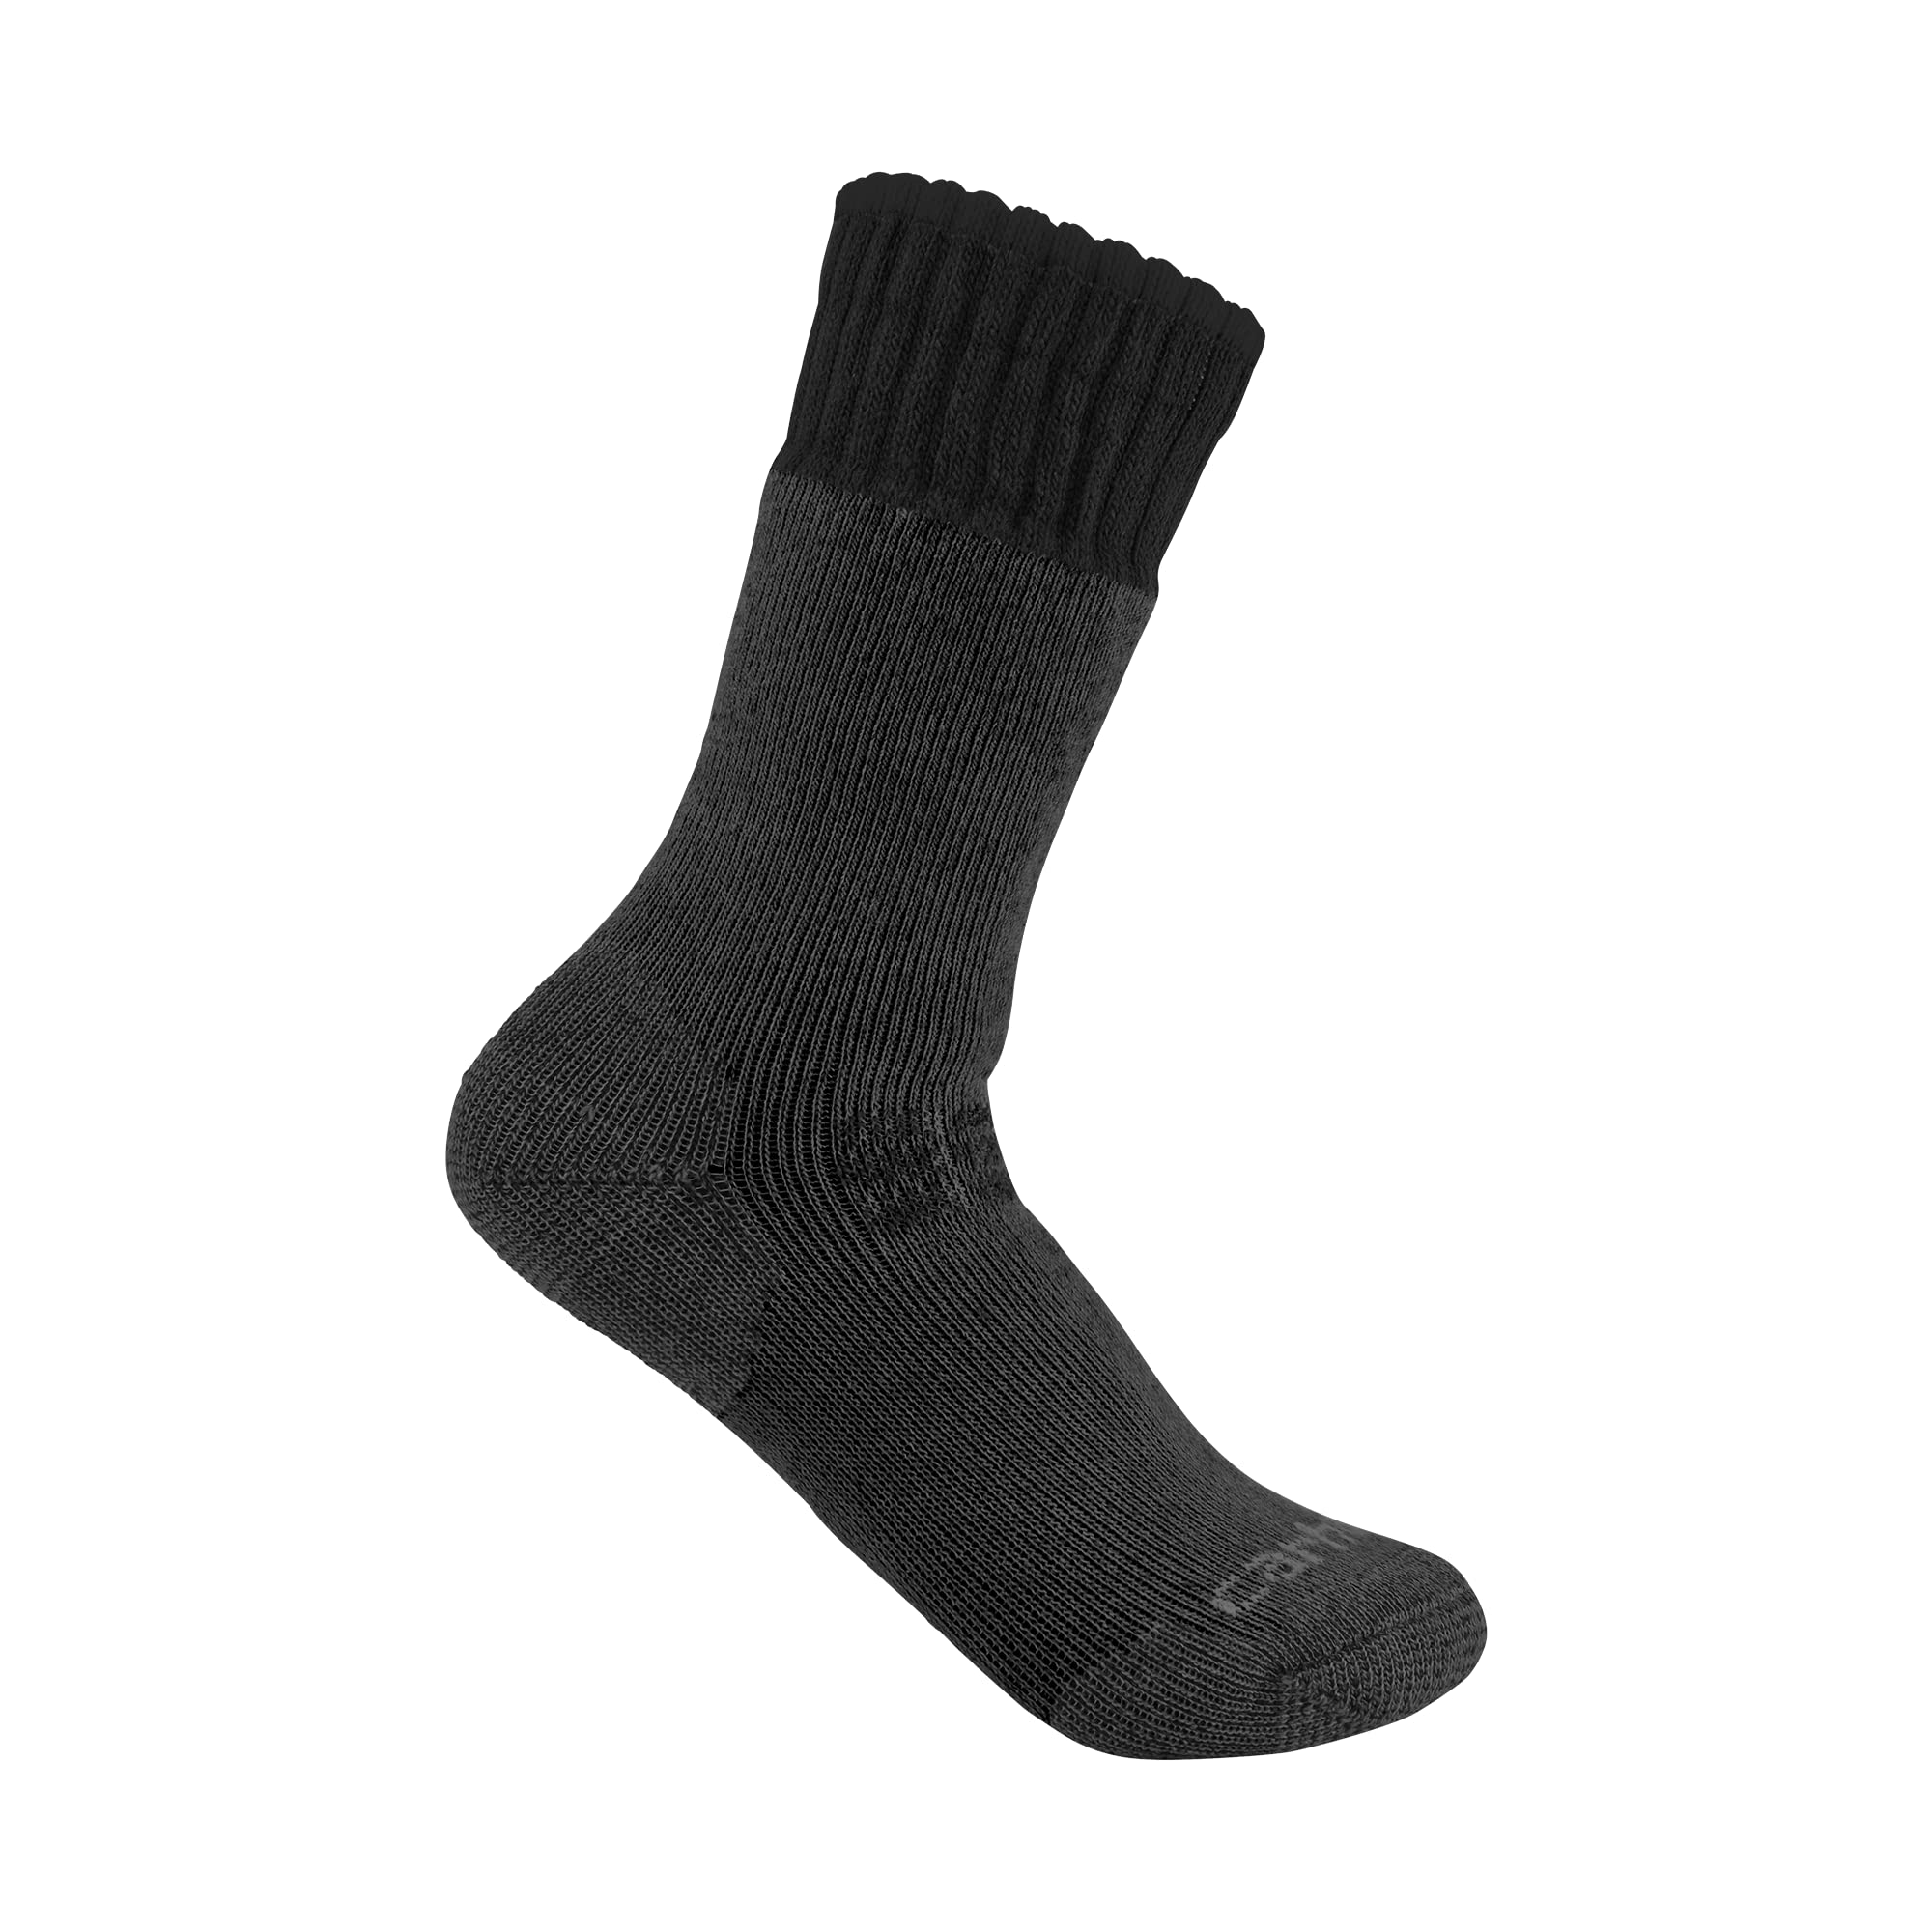 Carhartt Men's Heavyweight Synthetic-Wool Blend Boot Sock (Black, Medium) $2.75 + Free Shipping w/ Prime or on $35+